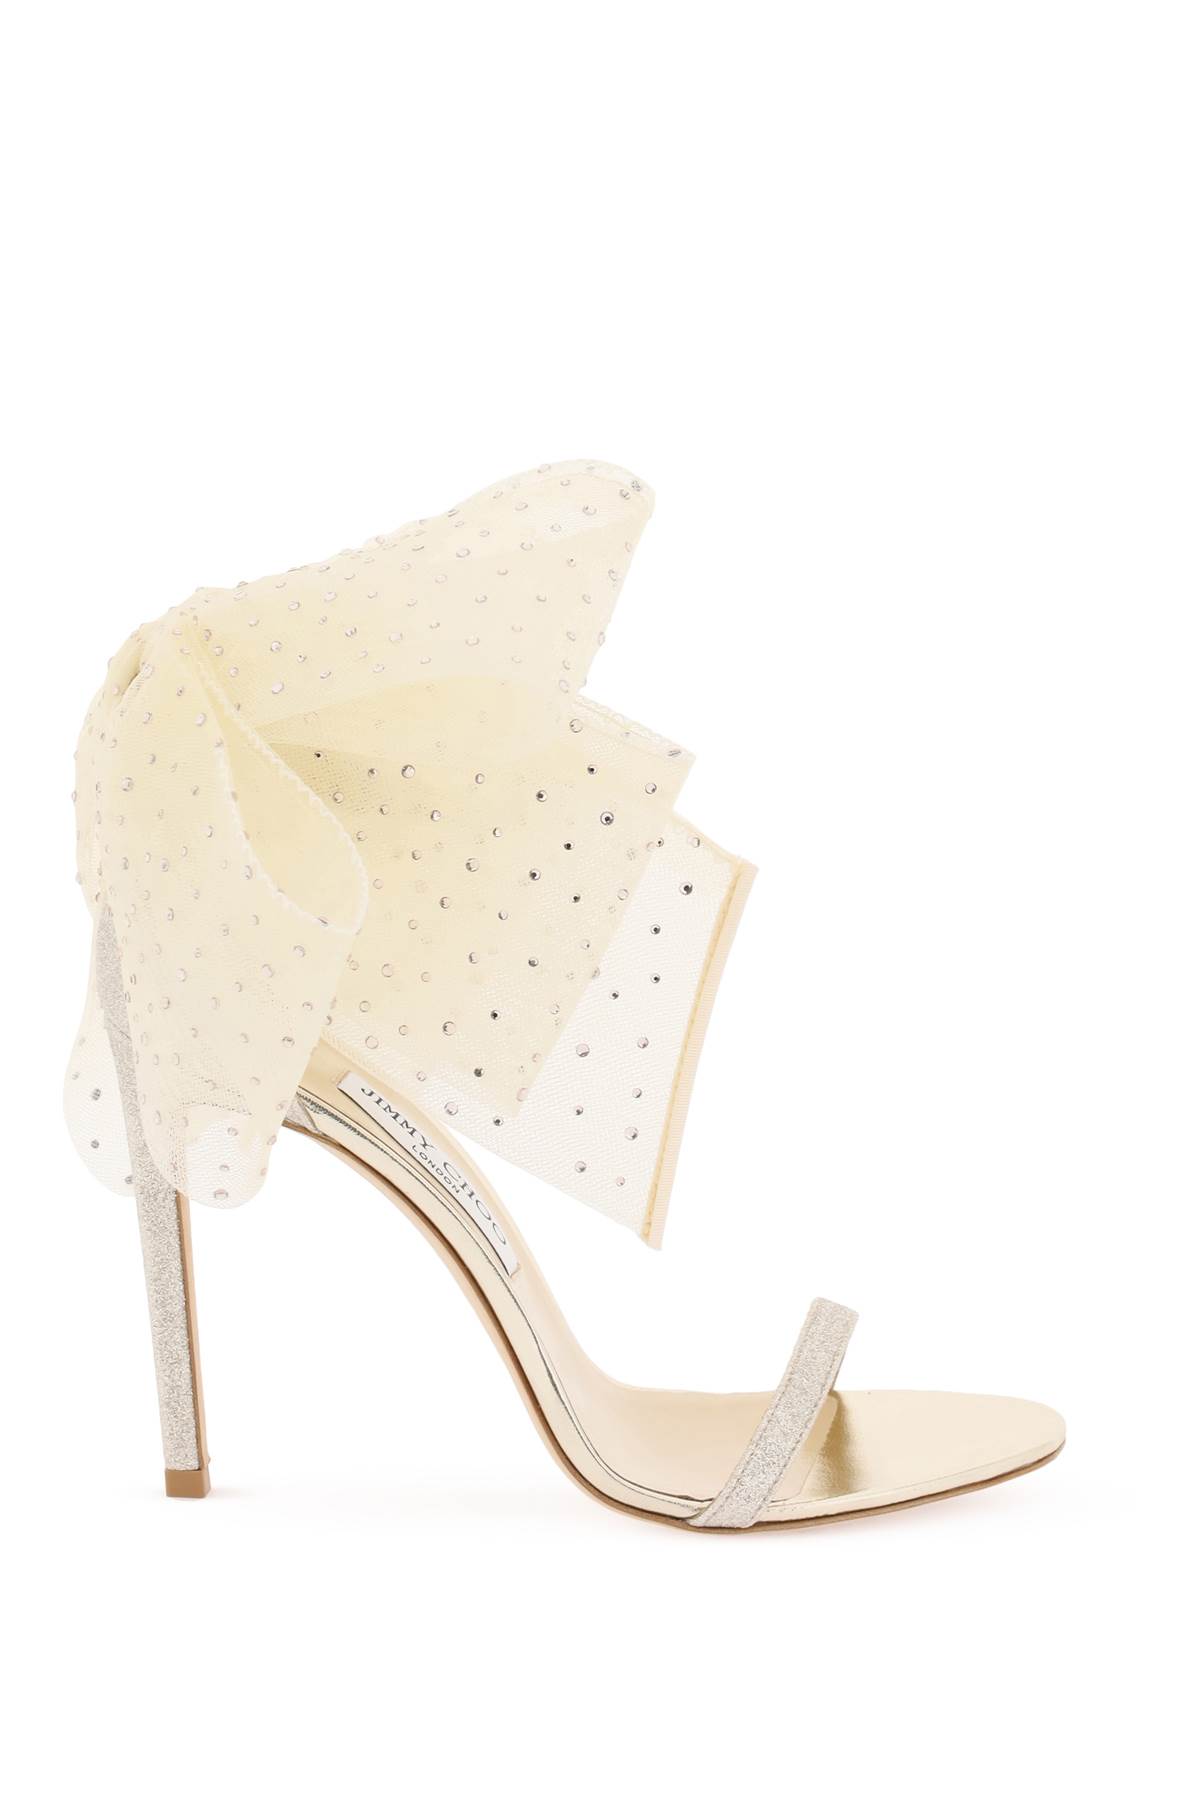 Shop Jimmy Choo Aveline 100 Sandals In Platinum Ice Ivory (gold)